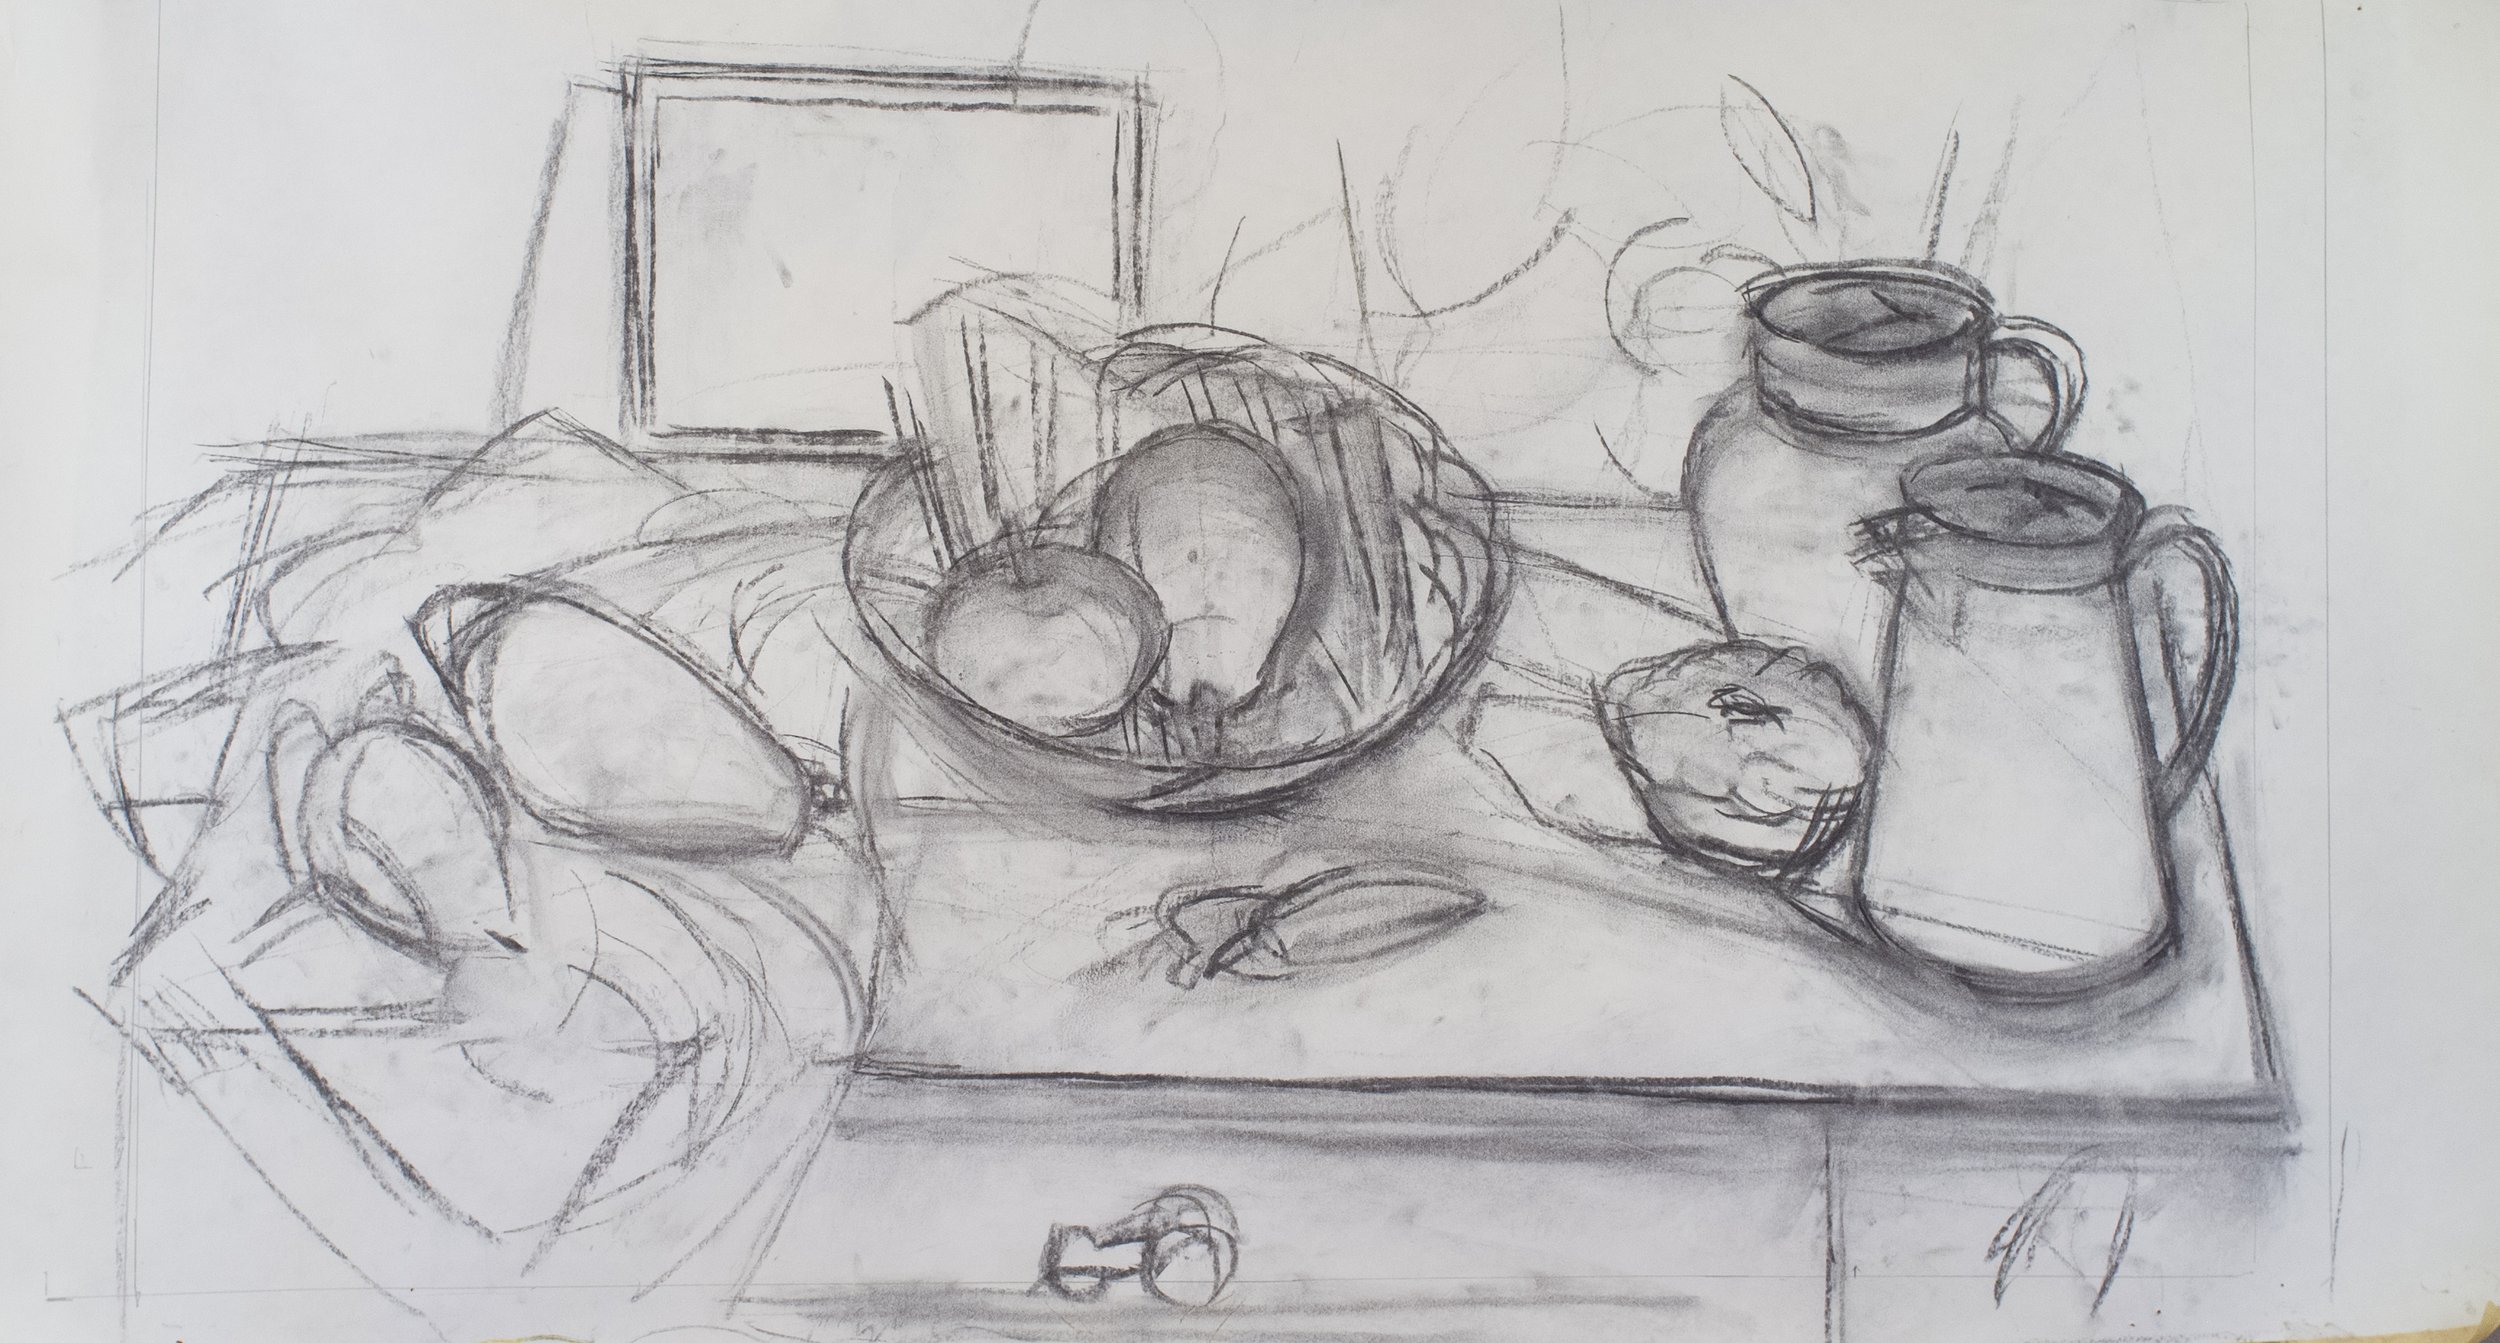   Knife with Friends (study) , c. 2001, charcoal/paper unmounted, 20” x 32, $400 